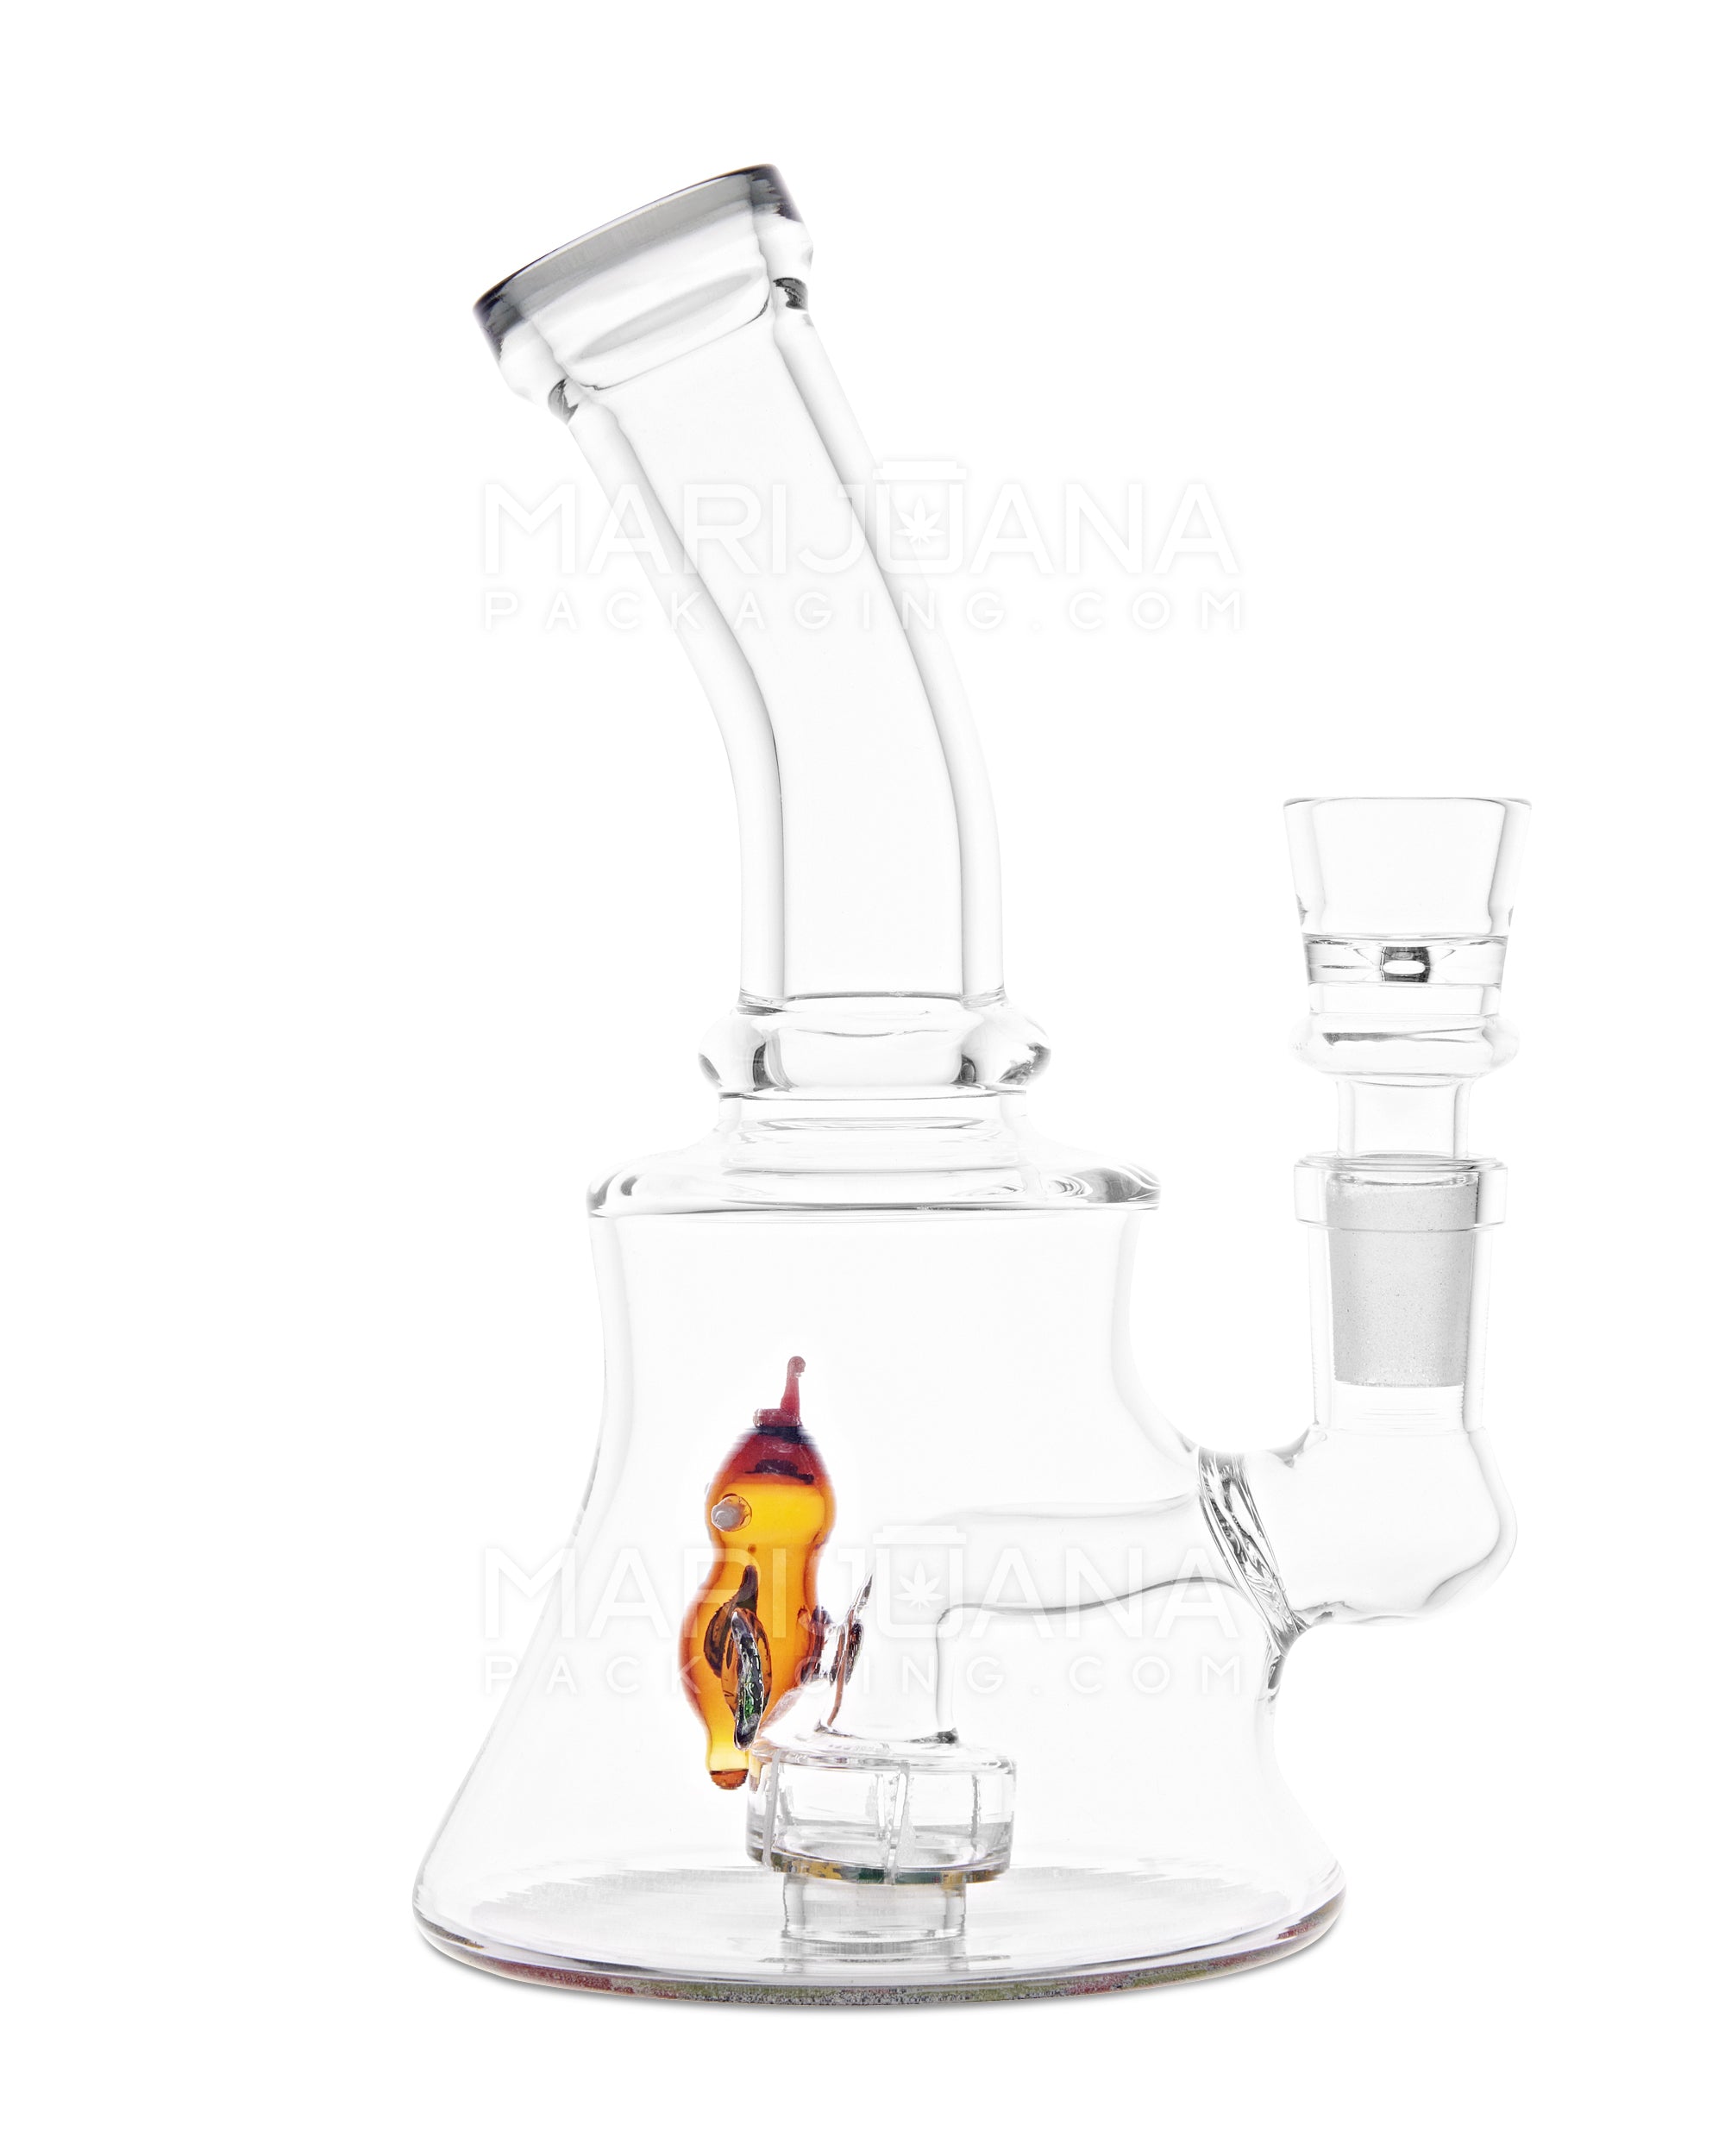 Bent Neck R&M Bee Showerhead Perc Glass Water Pipe w/ Base Decals | 7in Tall - 14mm Bowl - Assorted - 5